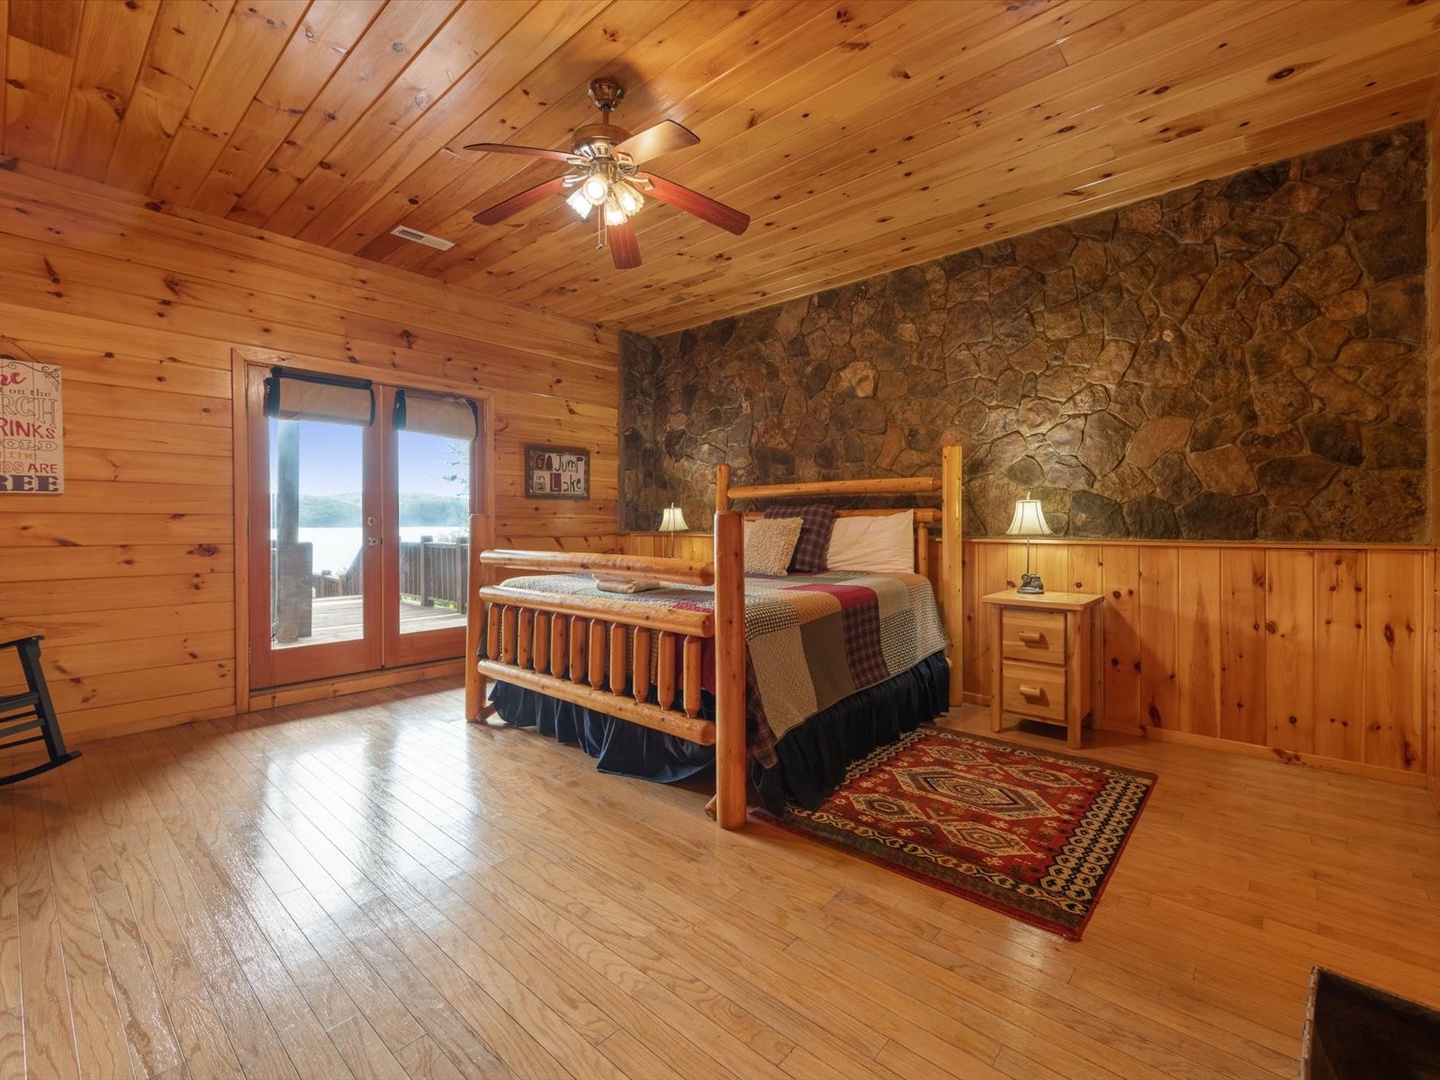 Medley Sunset Cove- Lower level king bedroom with deck access